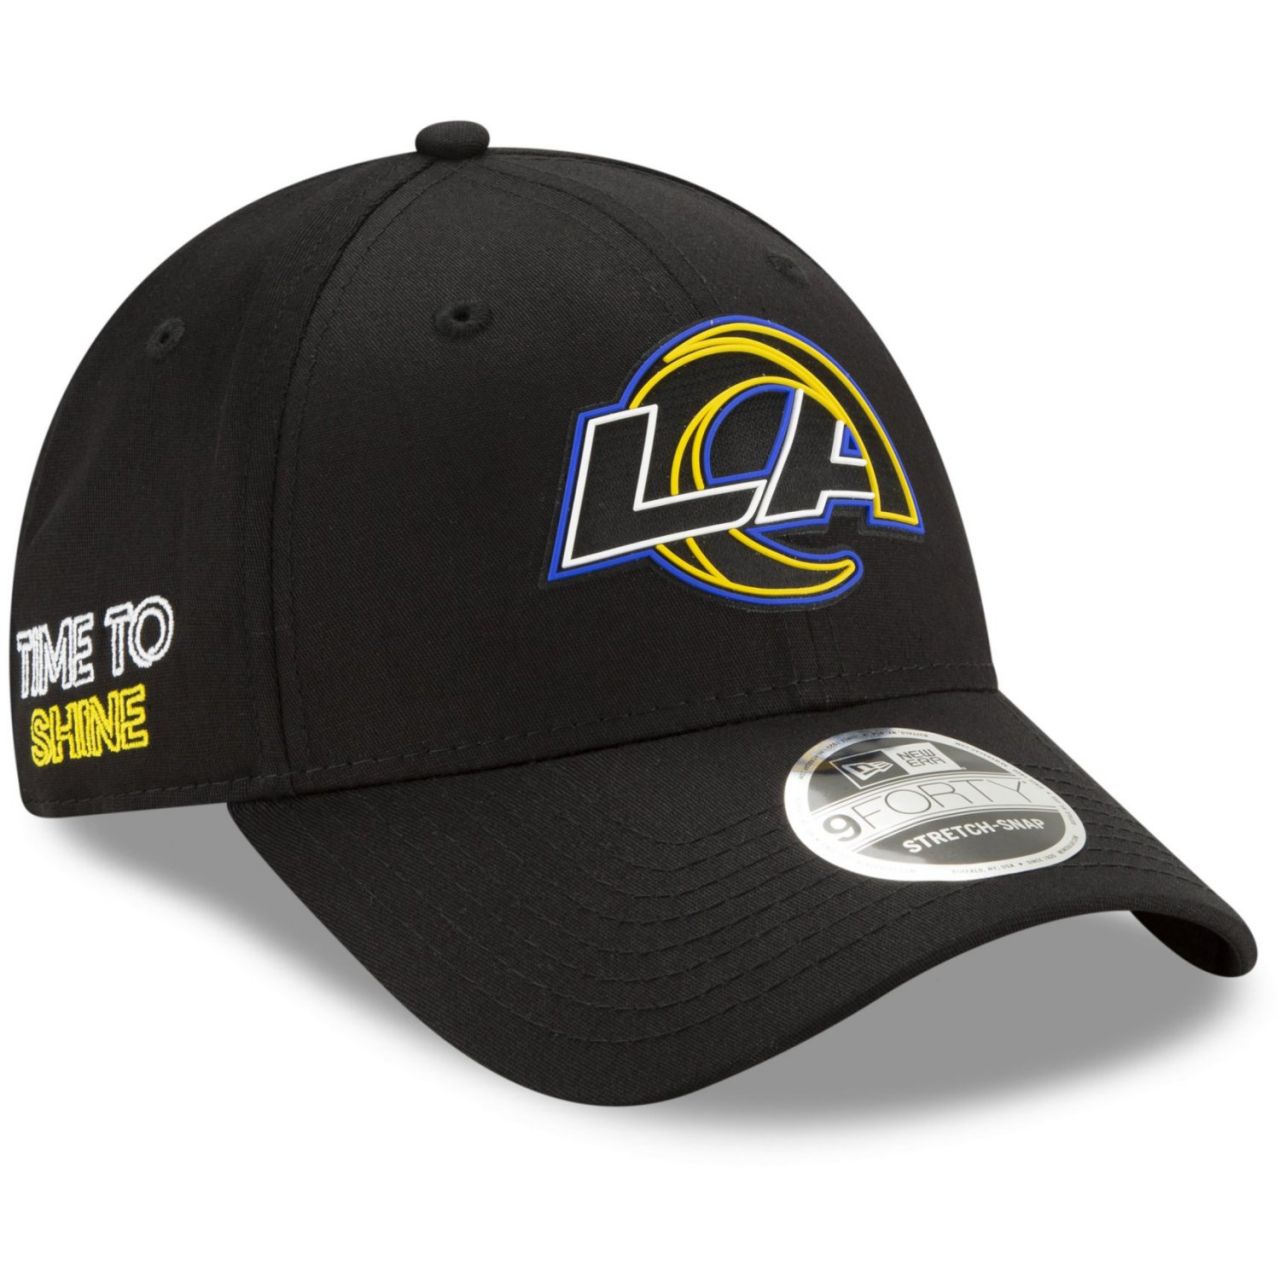 amfoo - New Era 9FORTY Stretch Cap - 2020 DRAFT Los Angeles Chargers